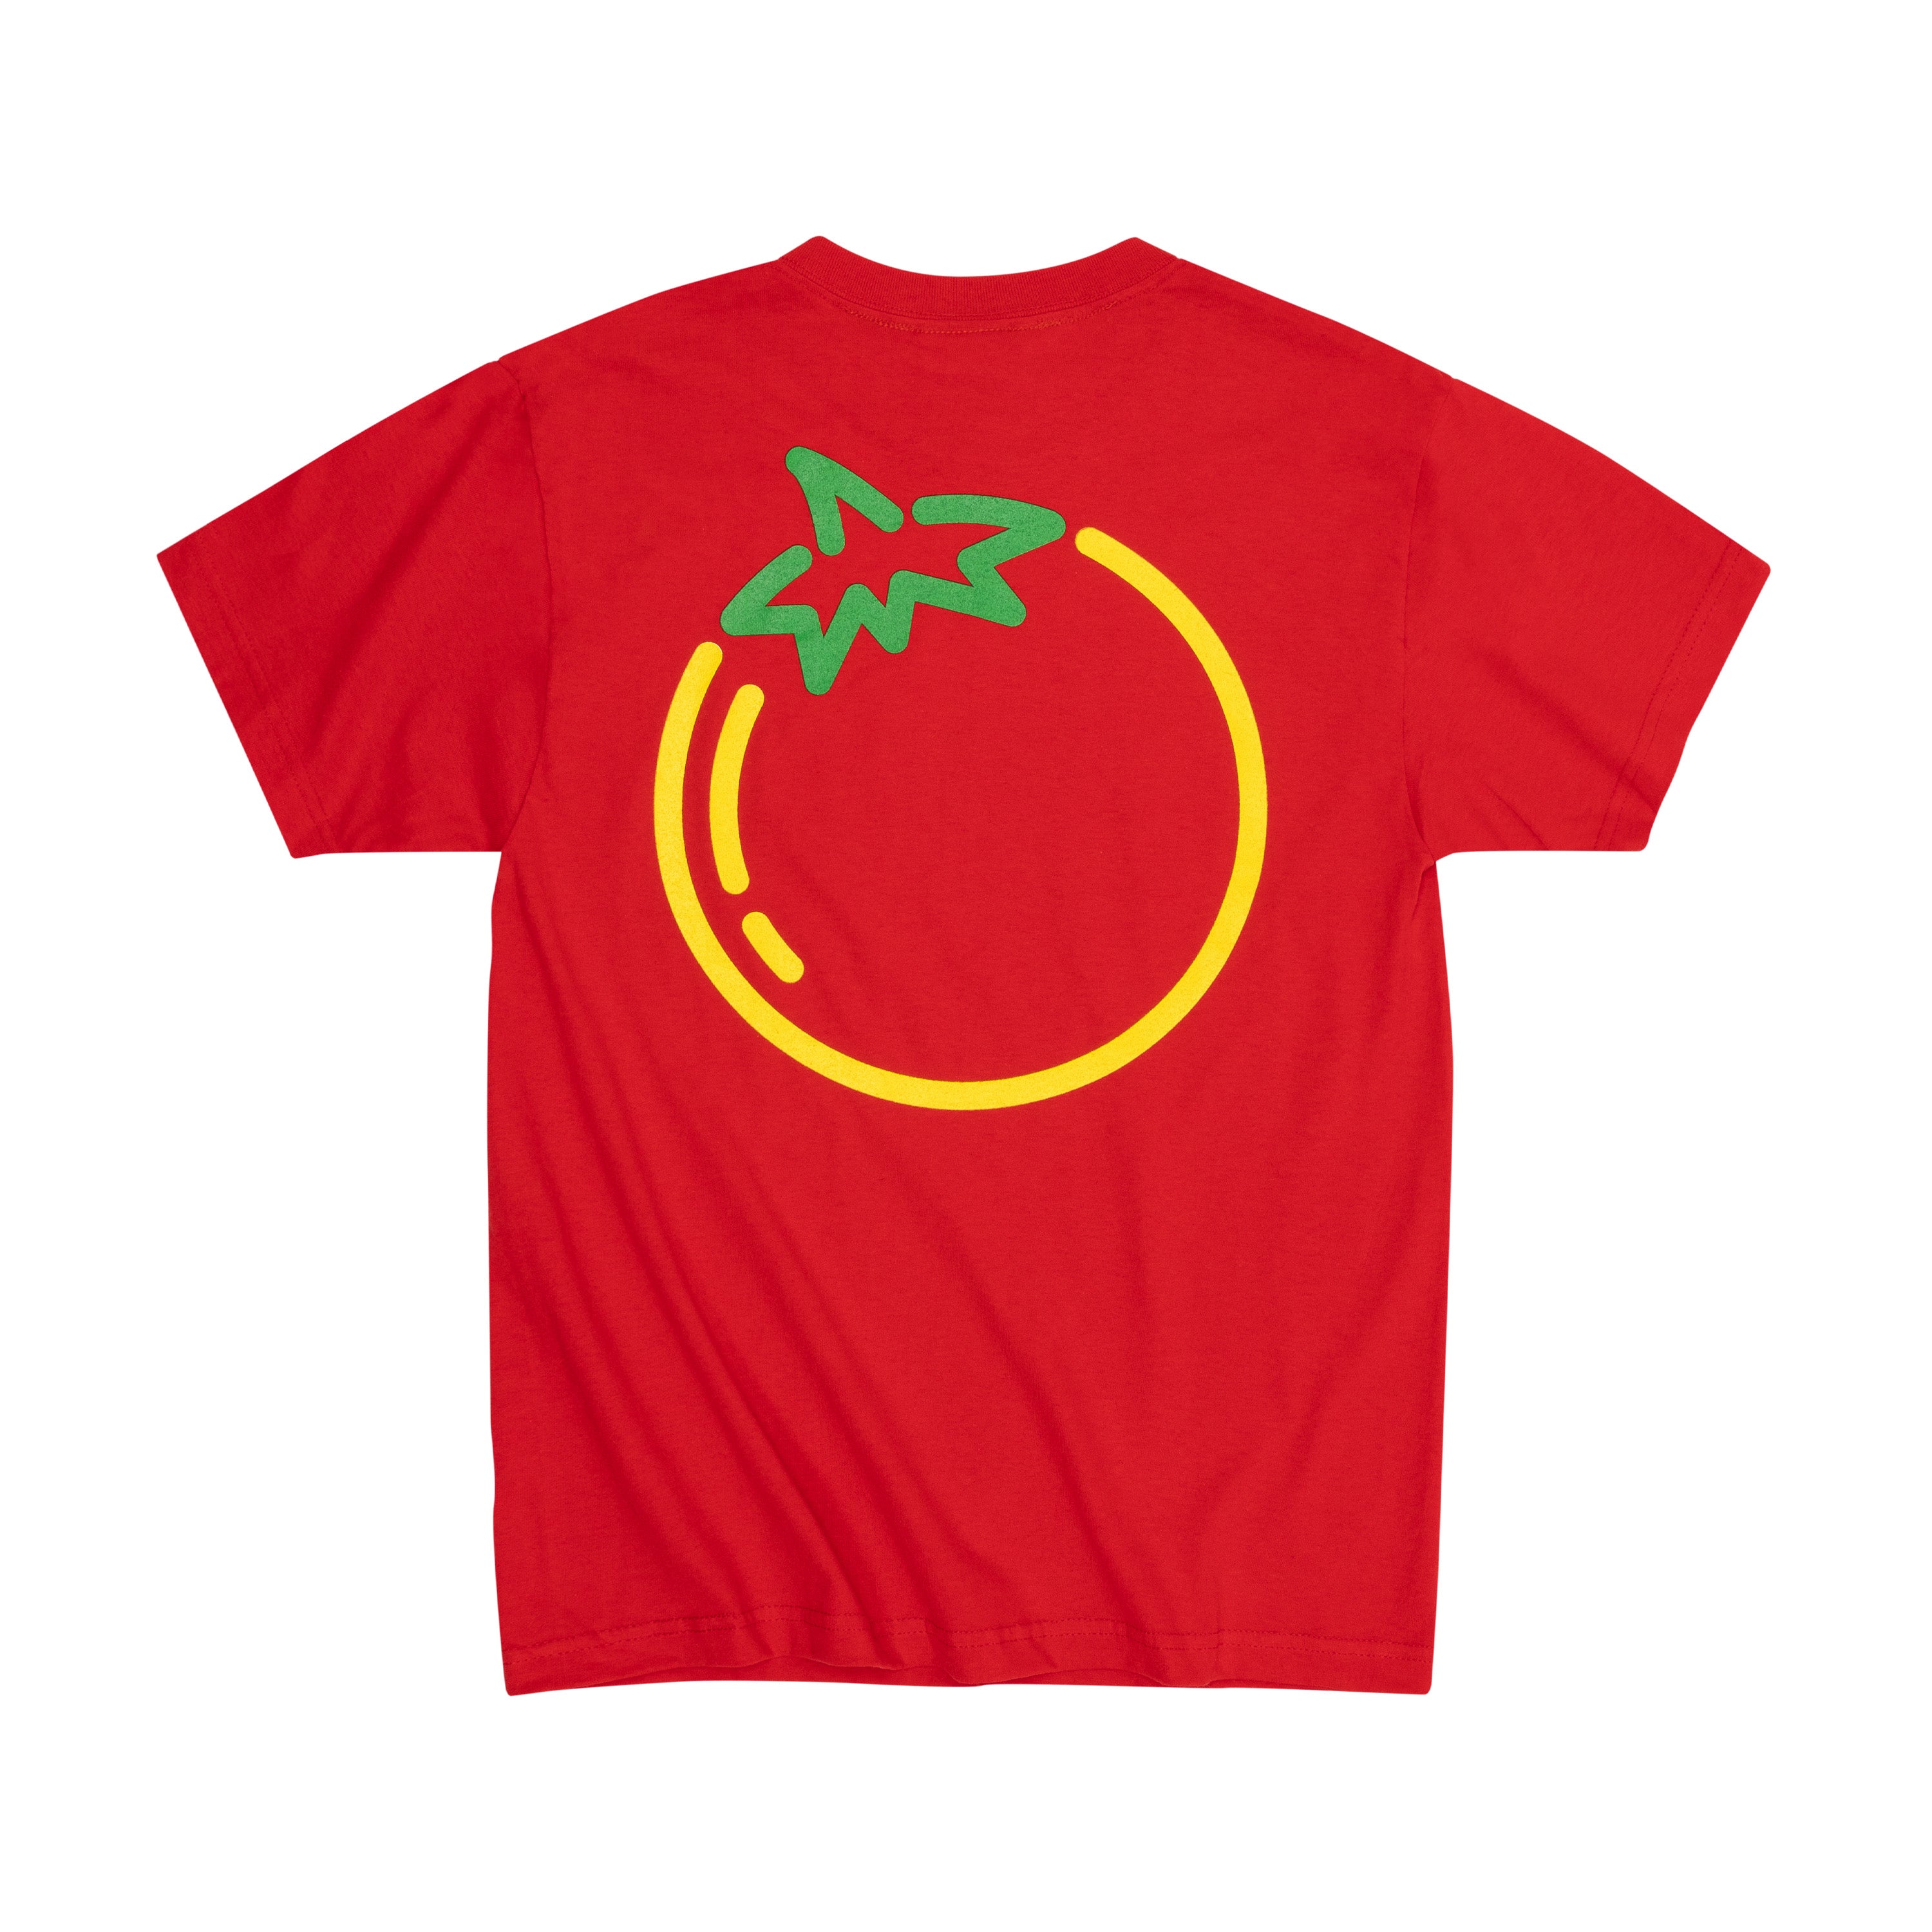 TOMATOES TEE - RED